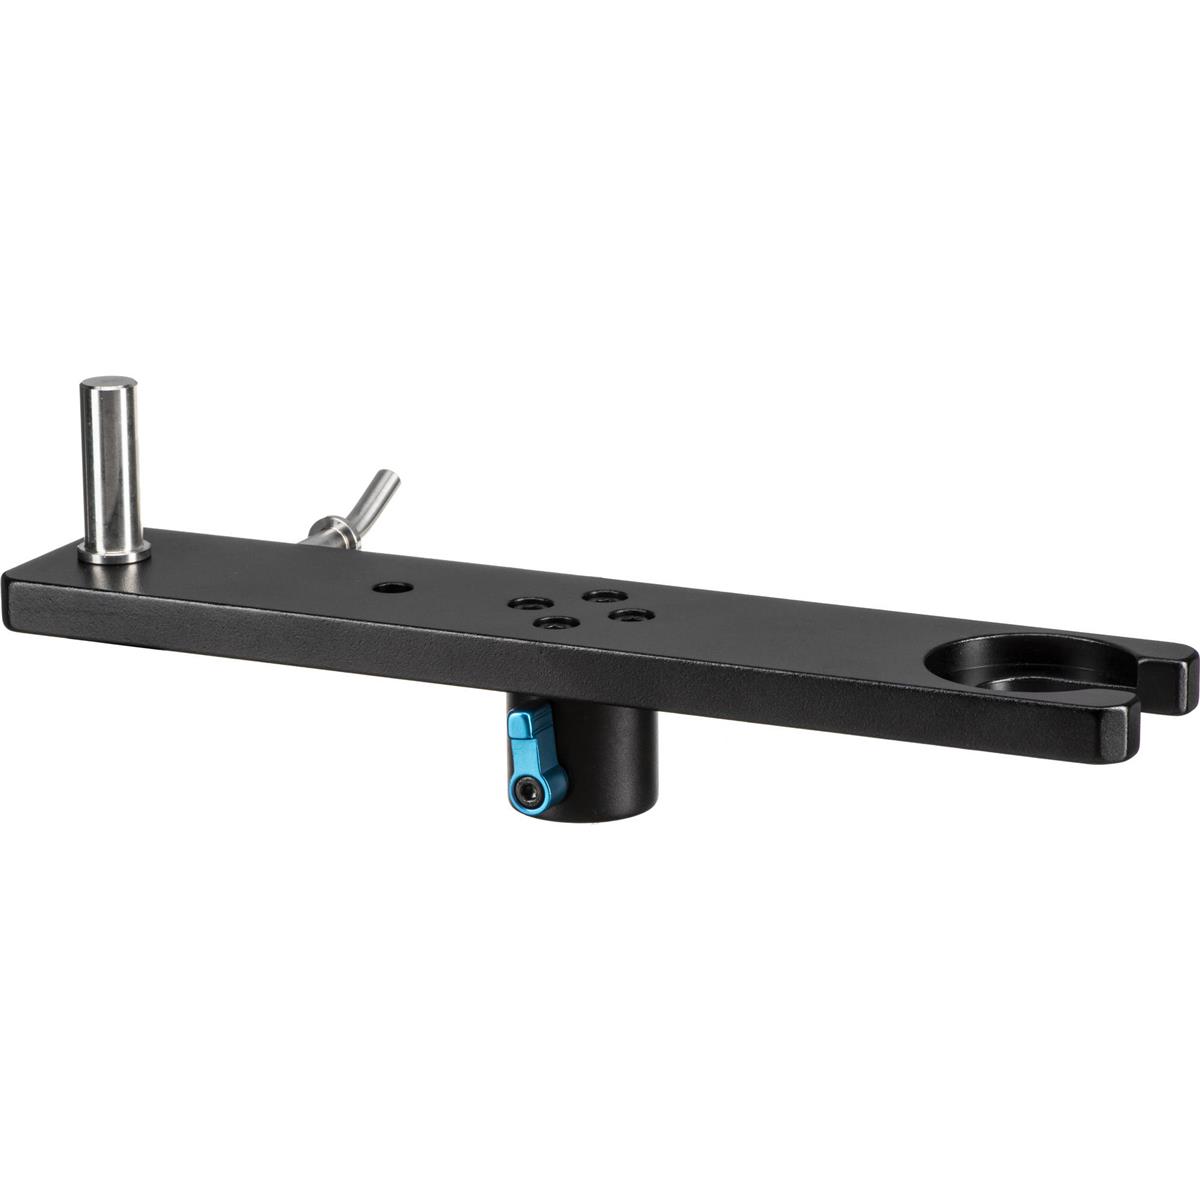 Image of Came-TV Docking Plate for Video Stabilizer